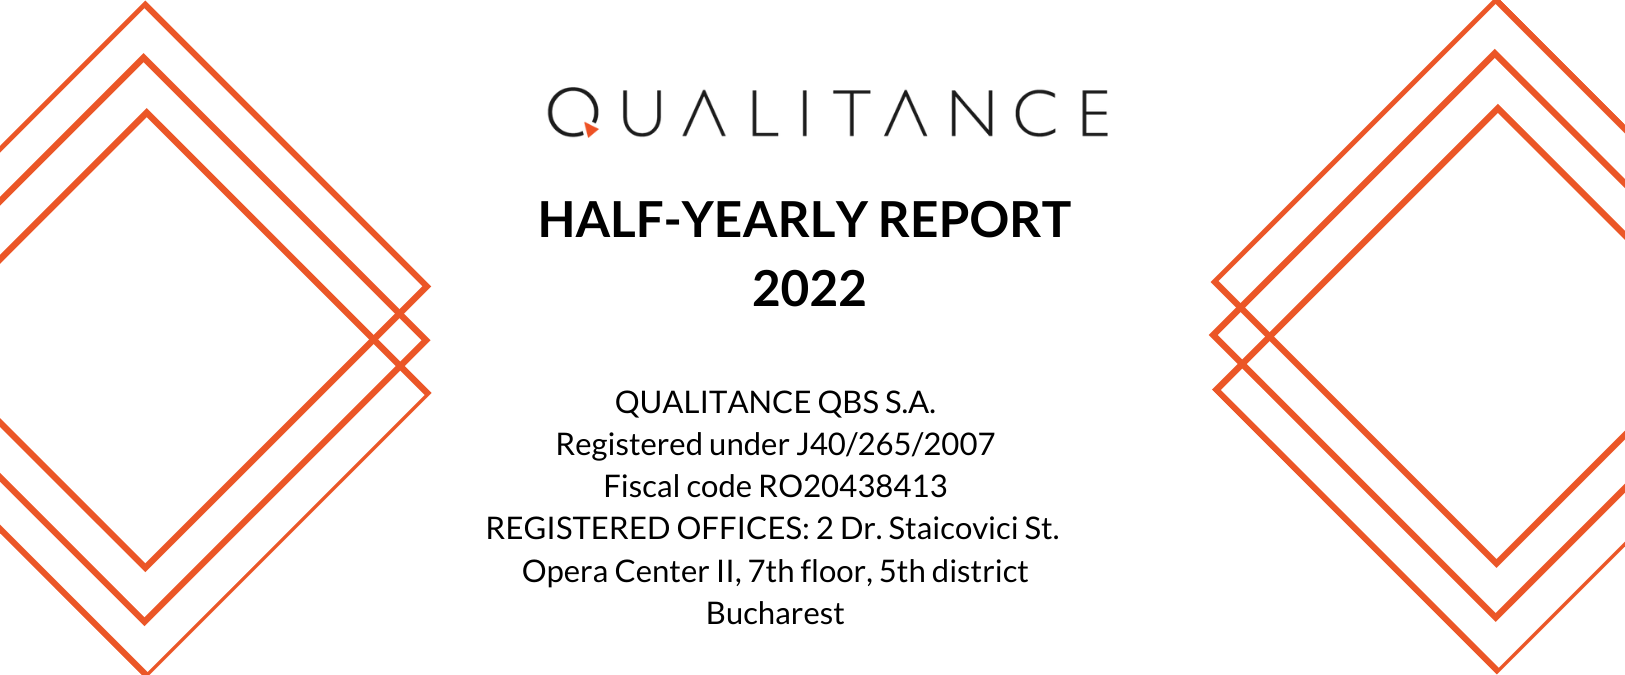 QUALITANCE 2022 Half-Yearly Report